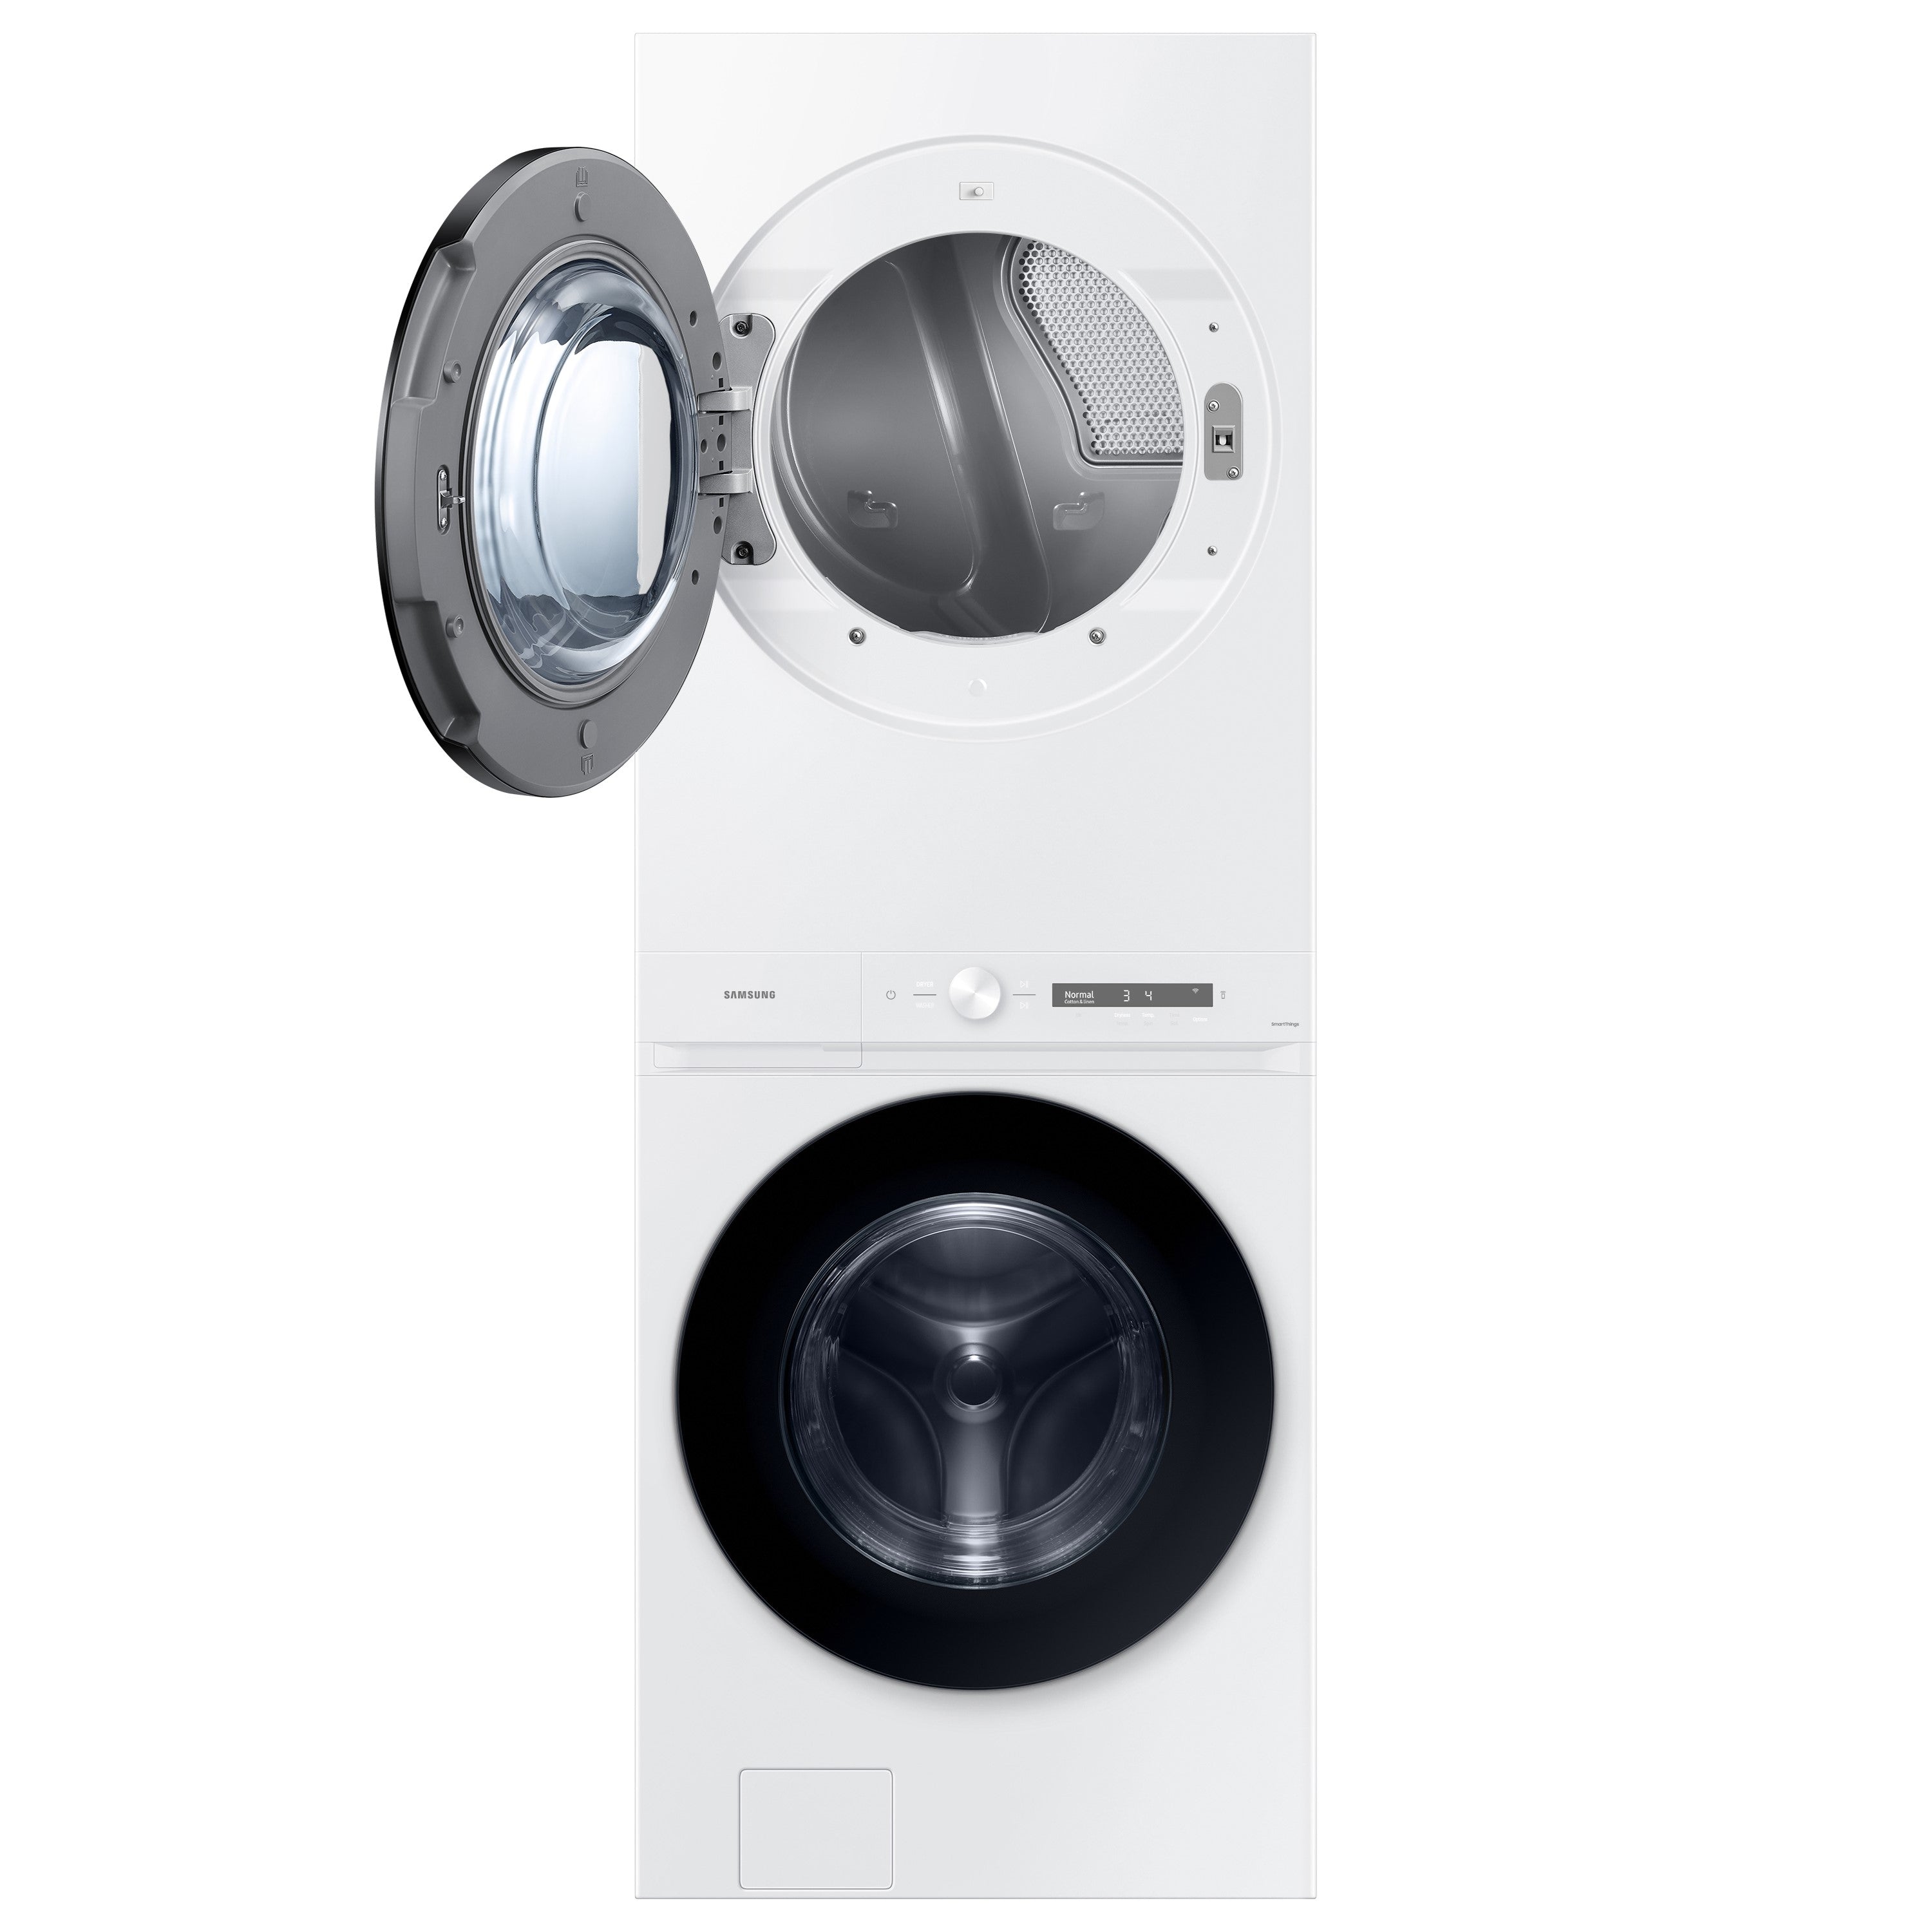 Samsung - 5.3 cu. Ft Washer and 7.6 cu. Ft Dryer Laundry Hub in White - WH46DBH100EWAC